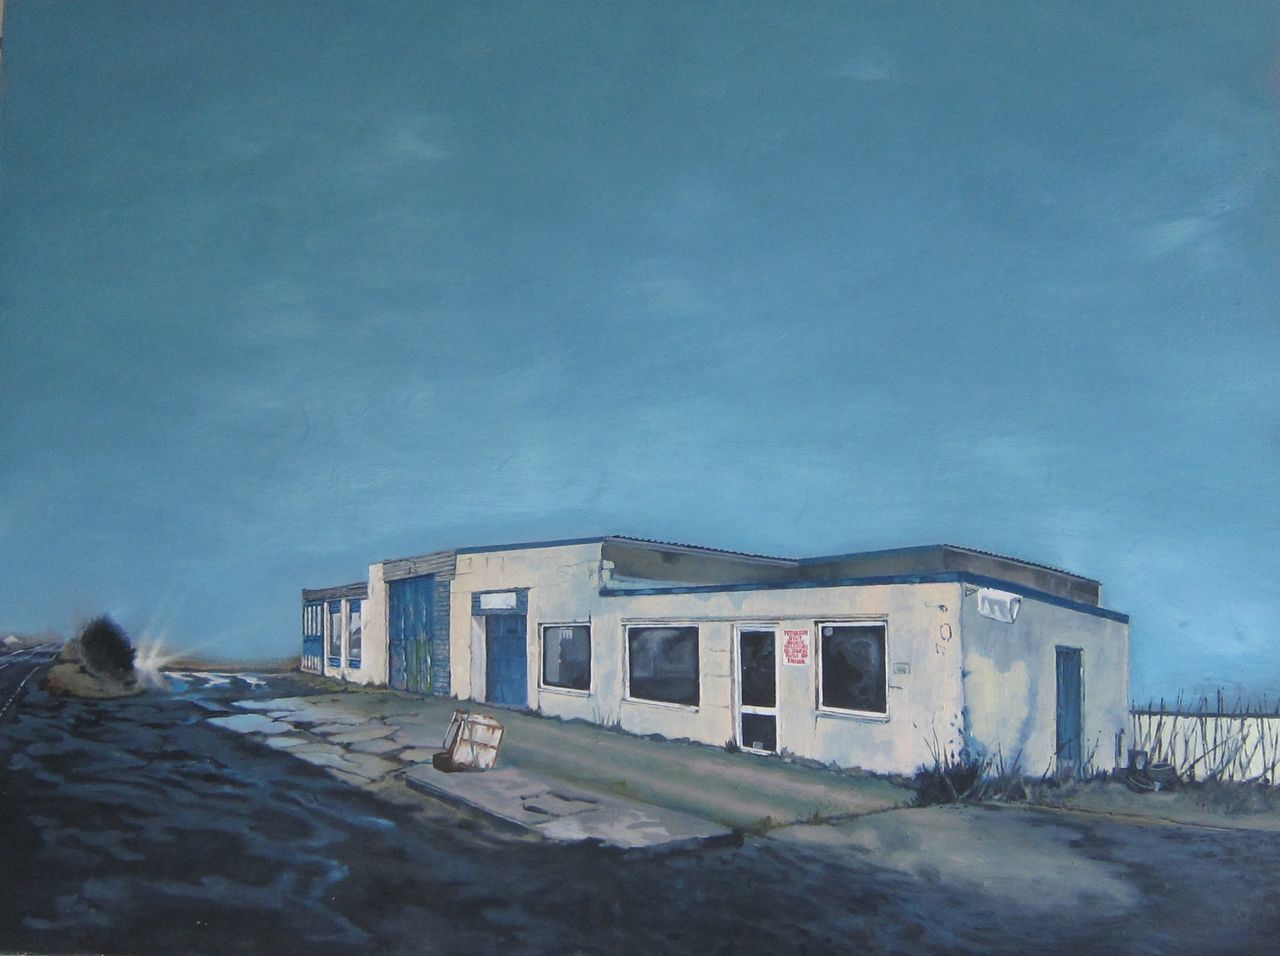 Spittal Garage - Almost Home by Helen Moore.